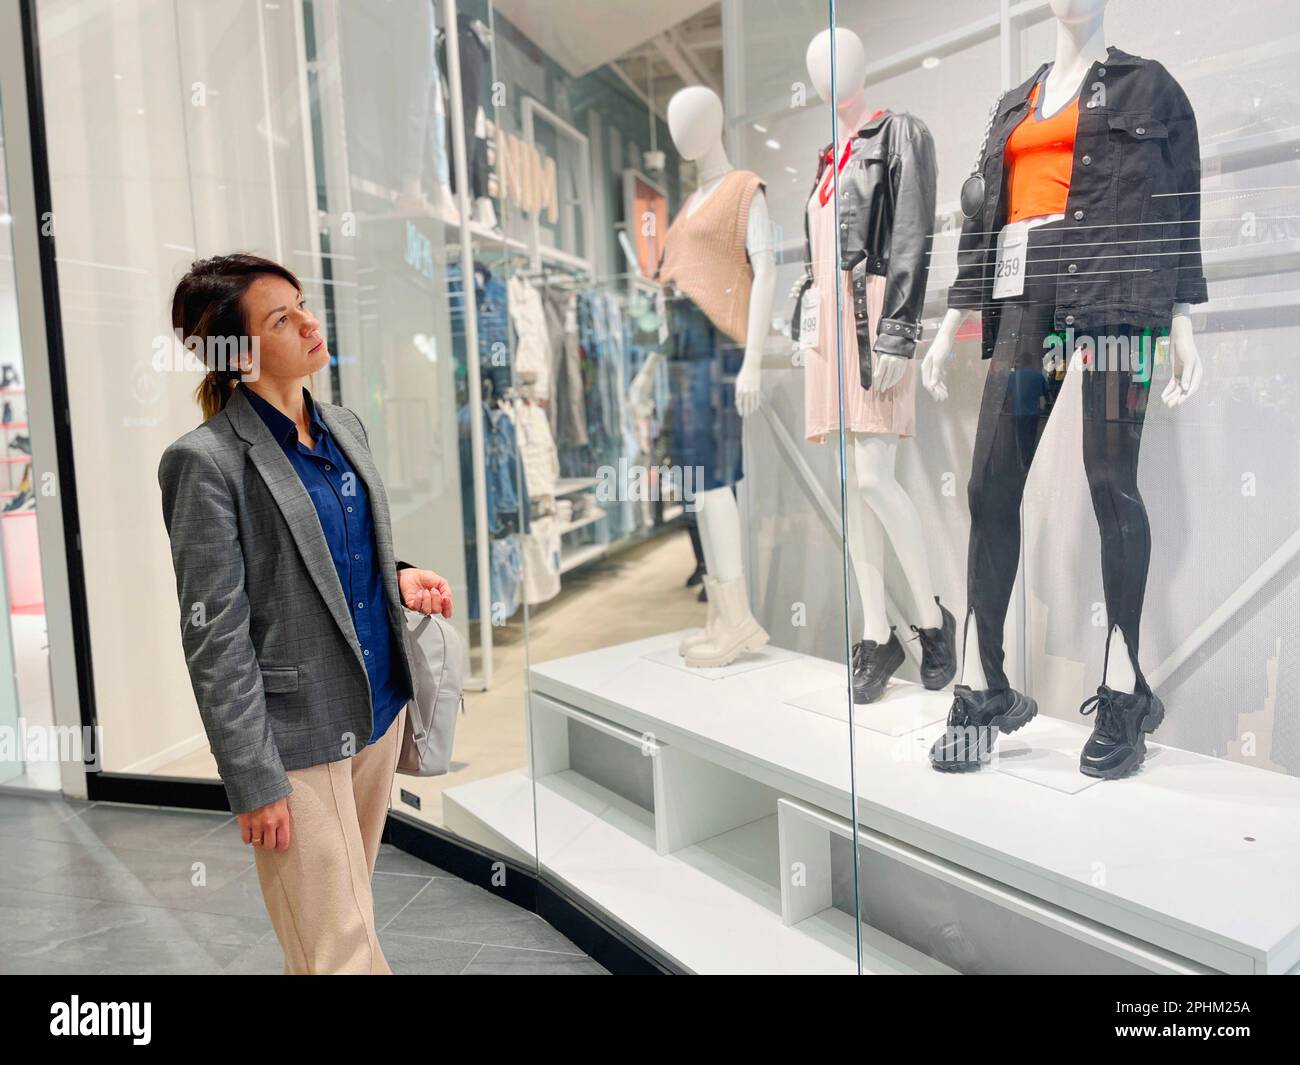 Female mannequins standing in store window display of women casual